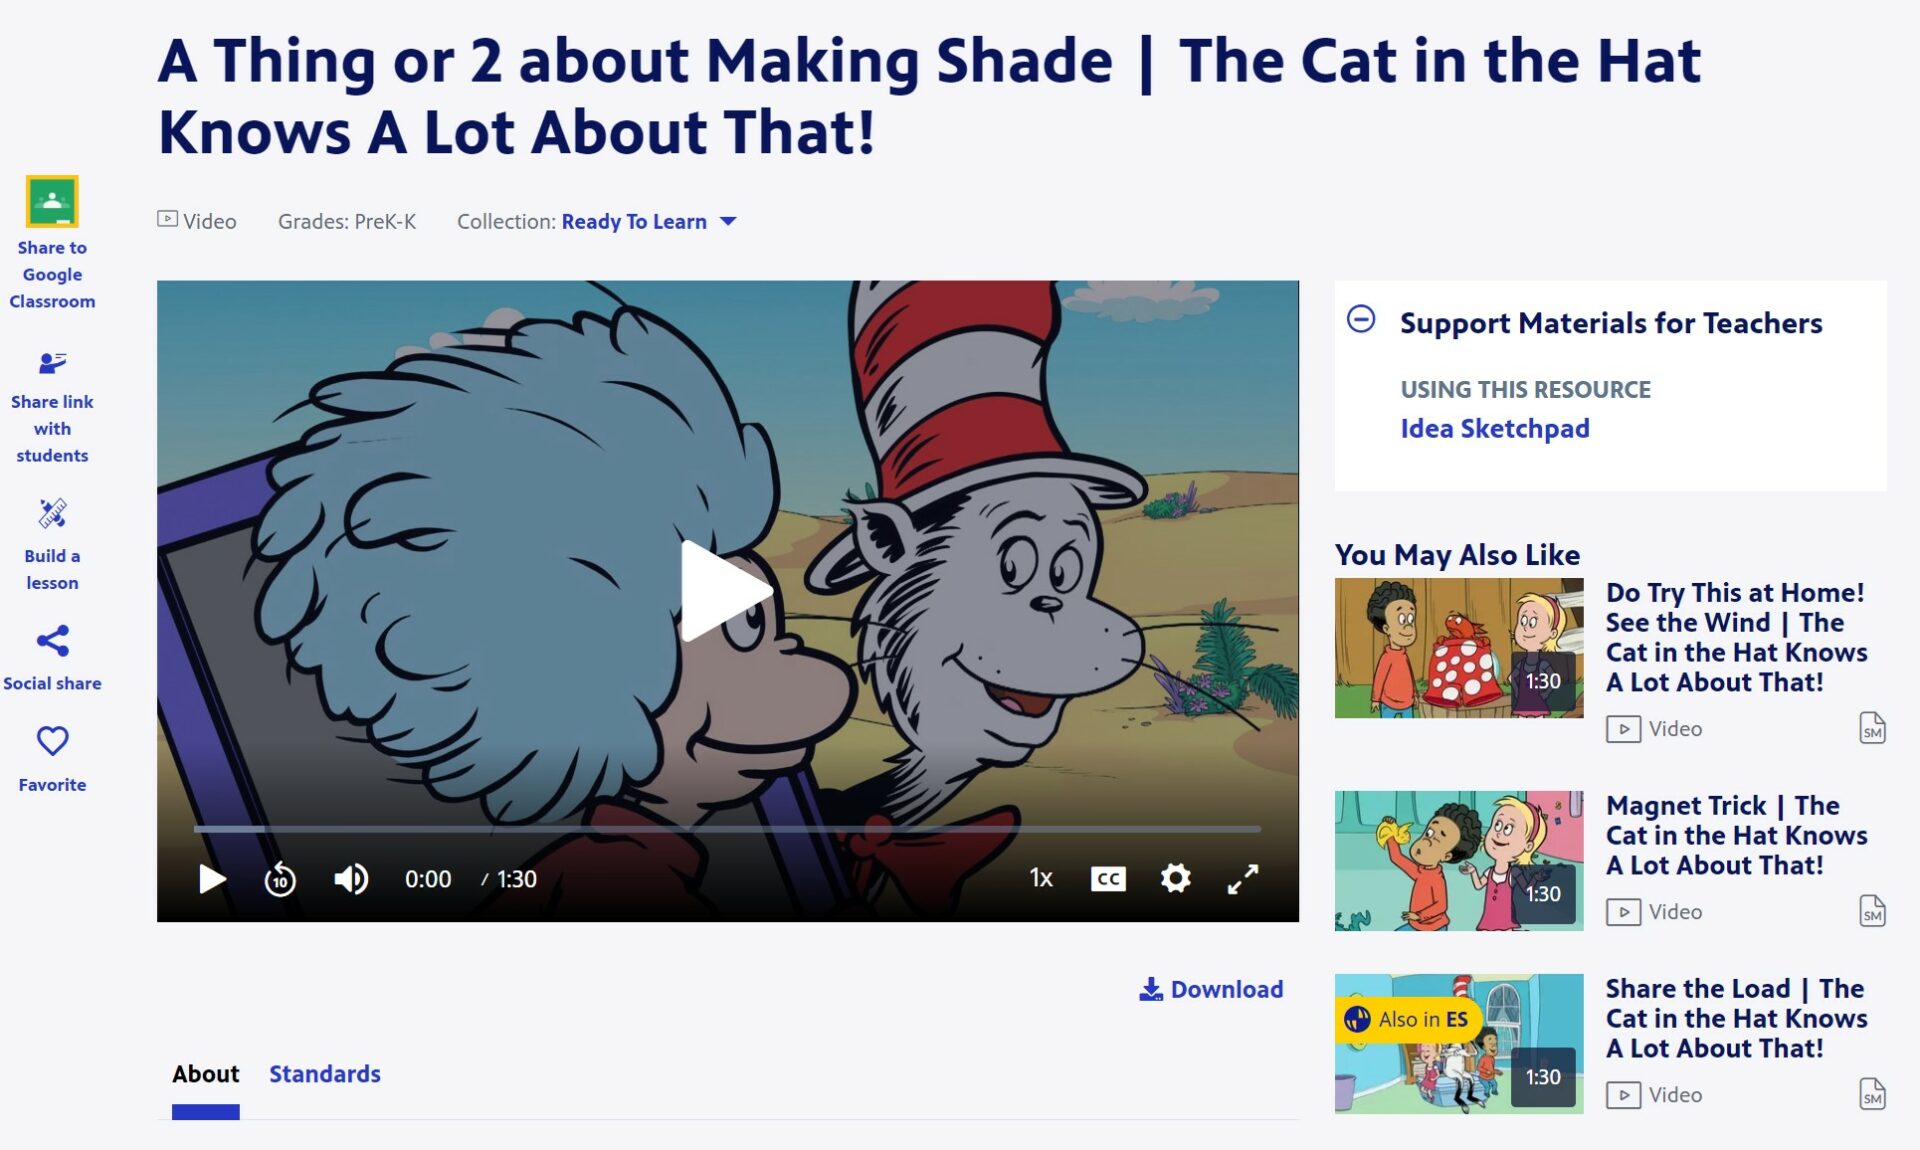 A Thing or 2 about Making Shade | The Cat in the Hat Knows A Lot About That!